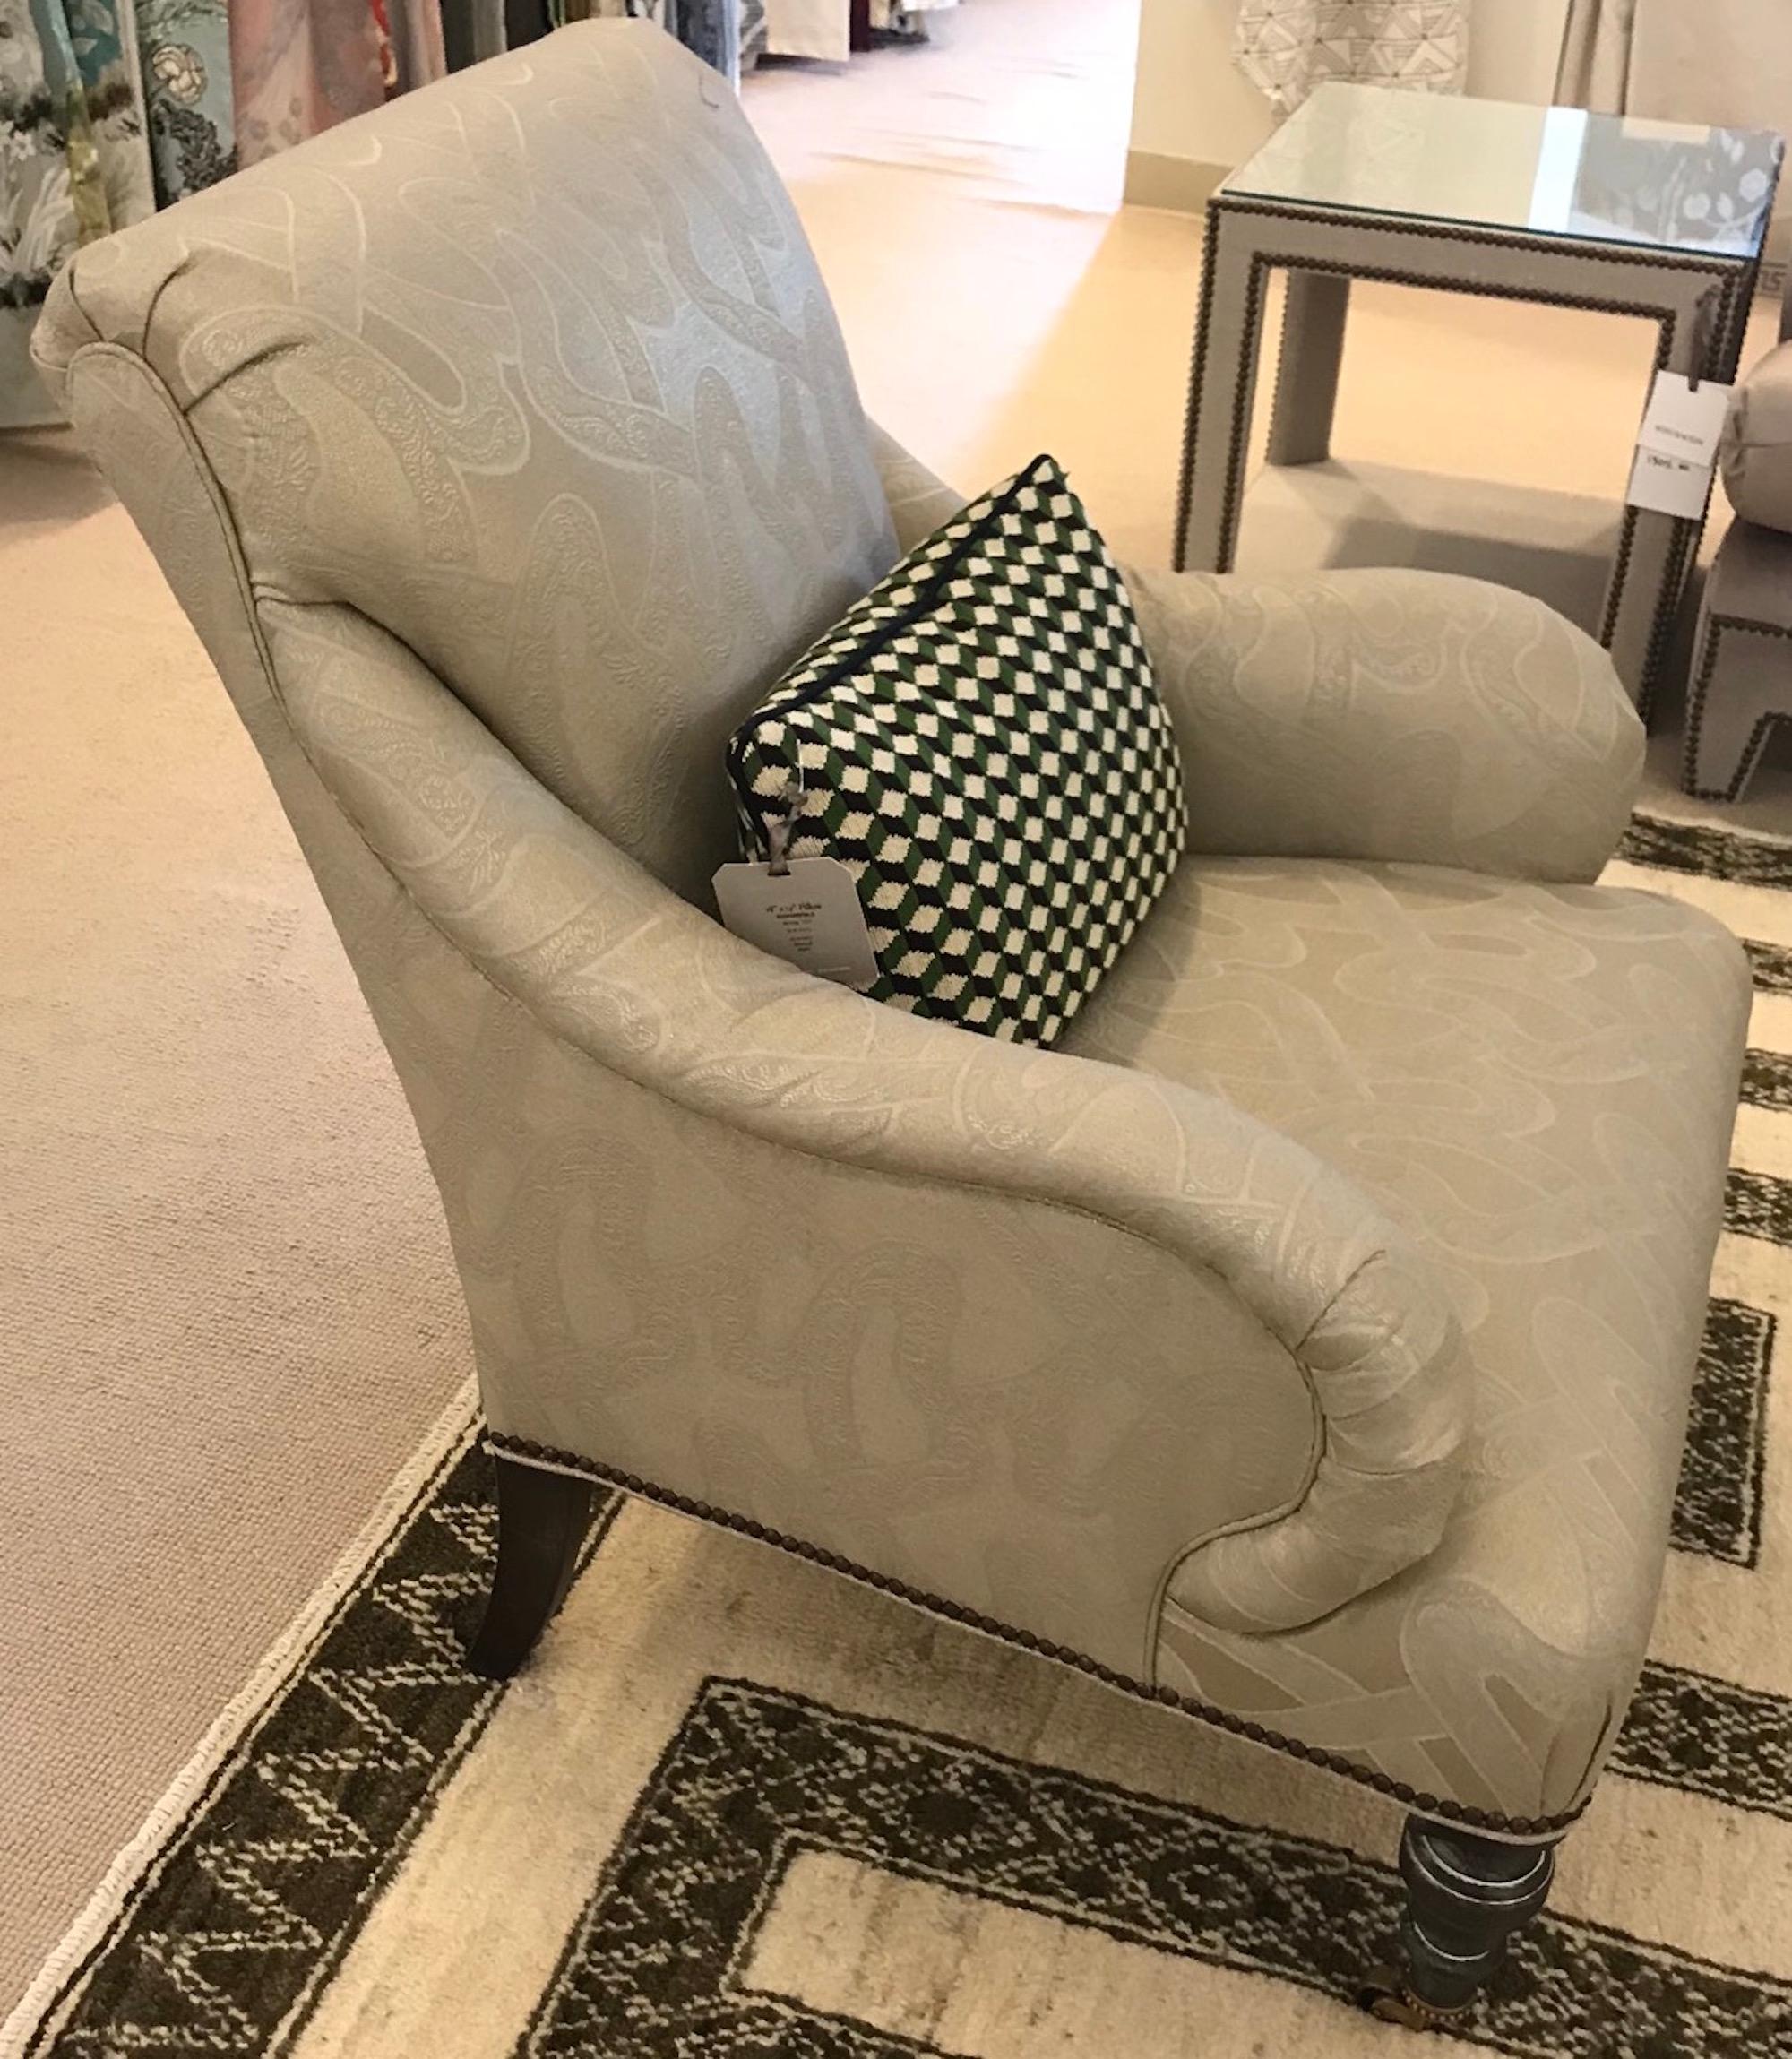 This striking Schumacher Albert chair is upholstered with our Chantilly fabric in a vermeil color way. The organic swirls and curves that define Chantilly are based on the intricate loops of the French region's famed lace. It is an elegant woven